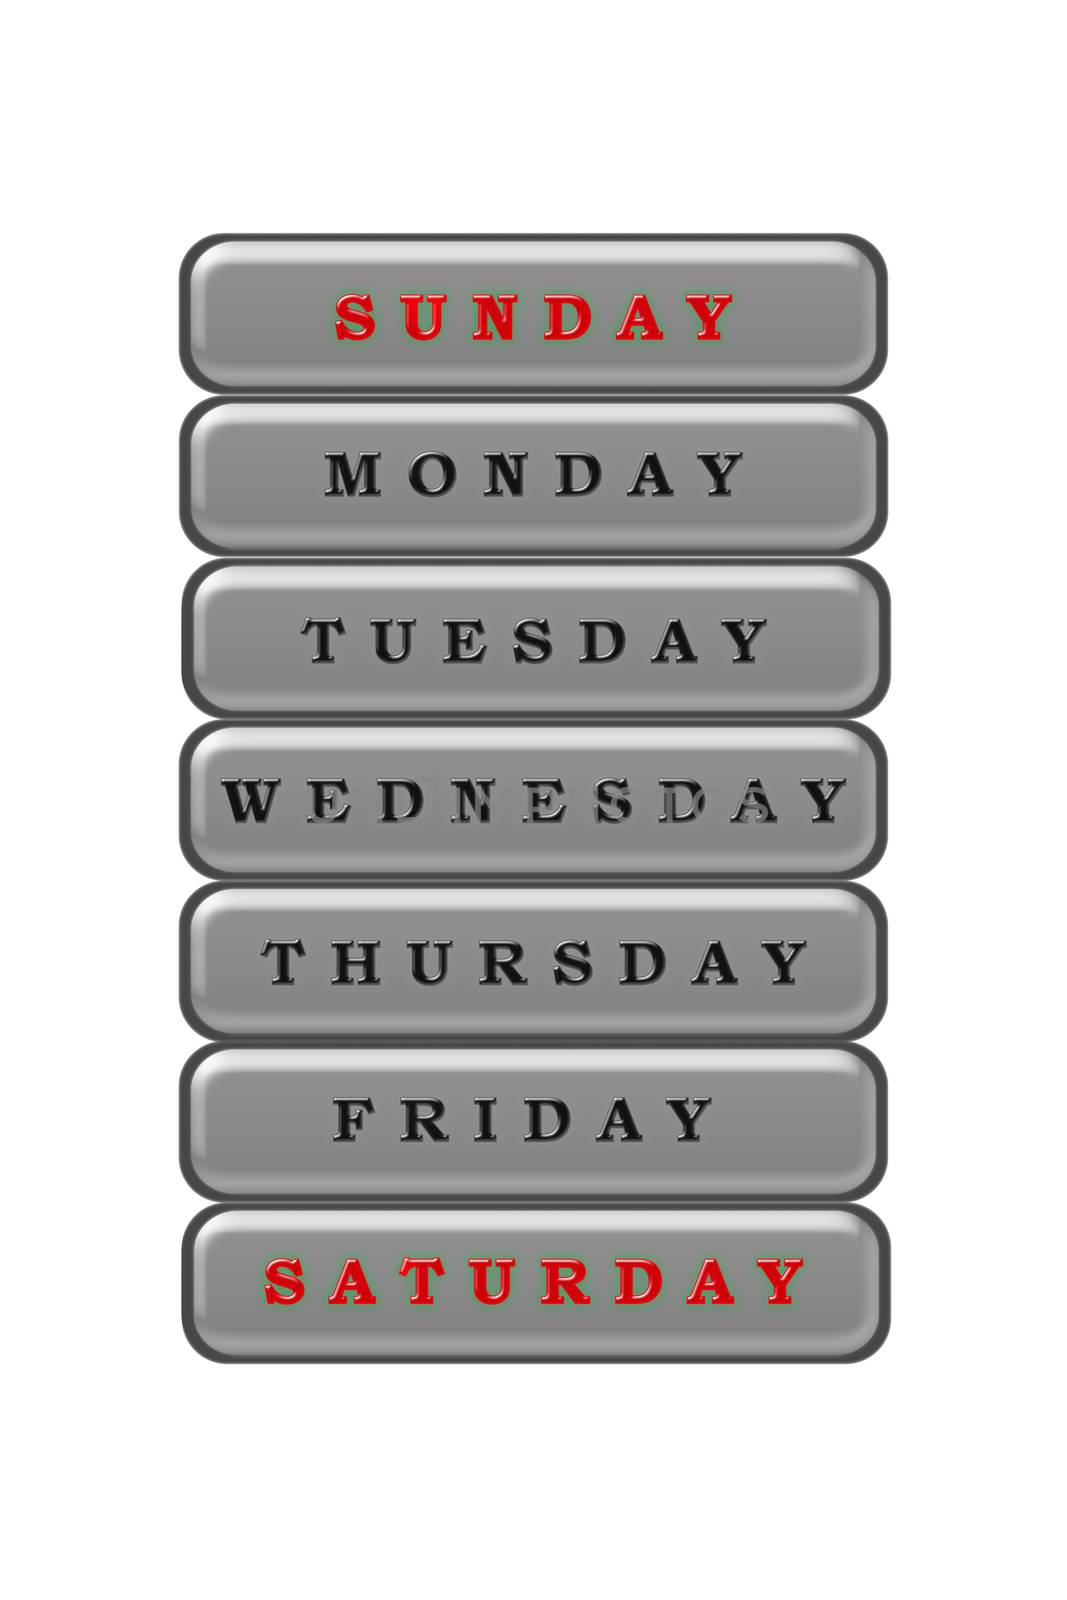 In the days of the week list, Saturday and Sunday are highlighte by Grommik